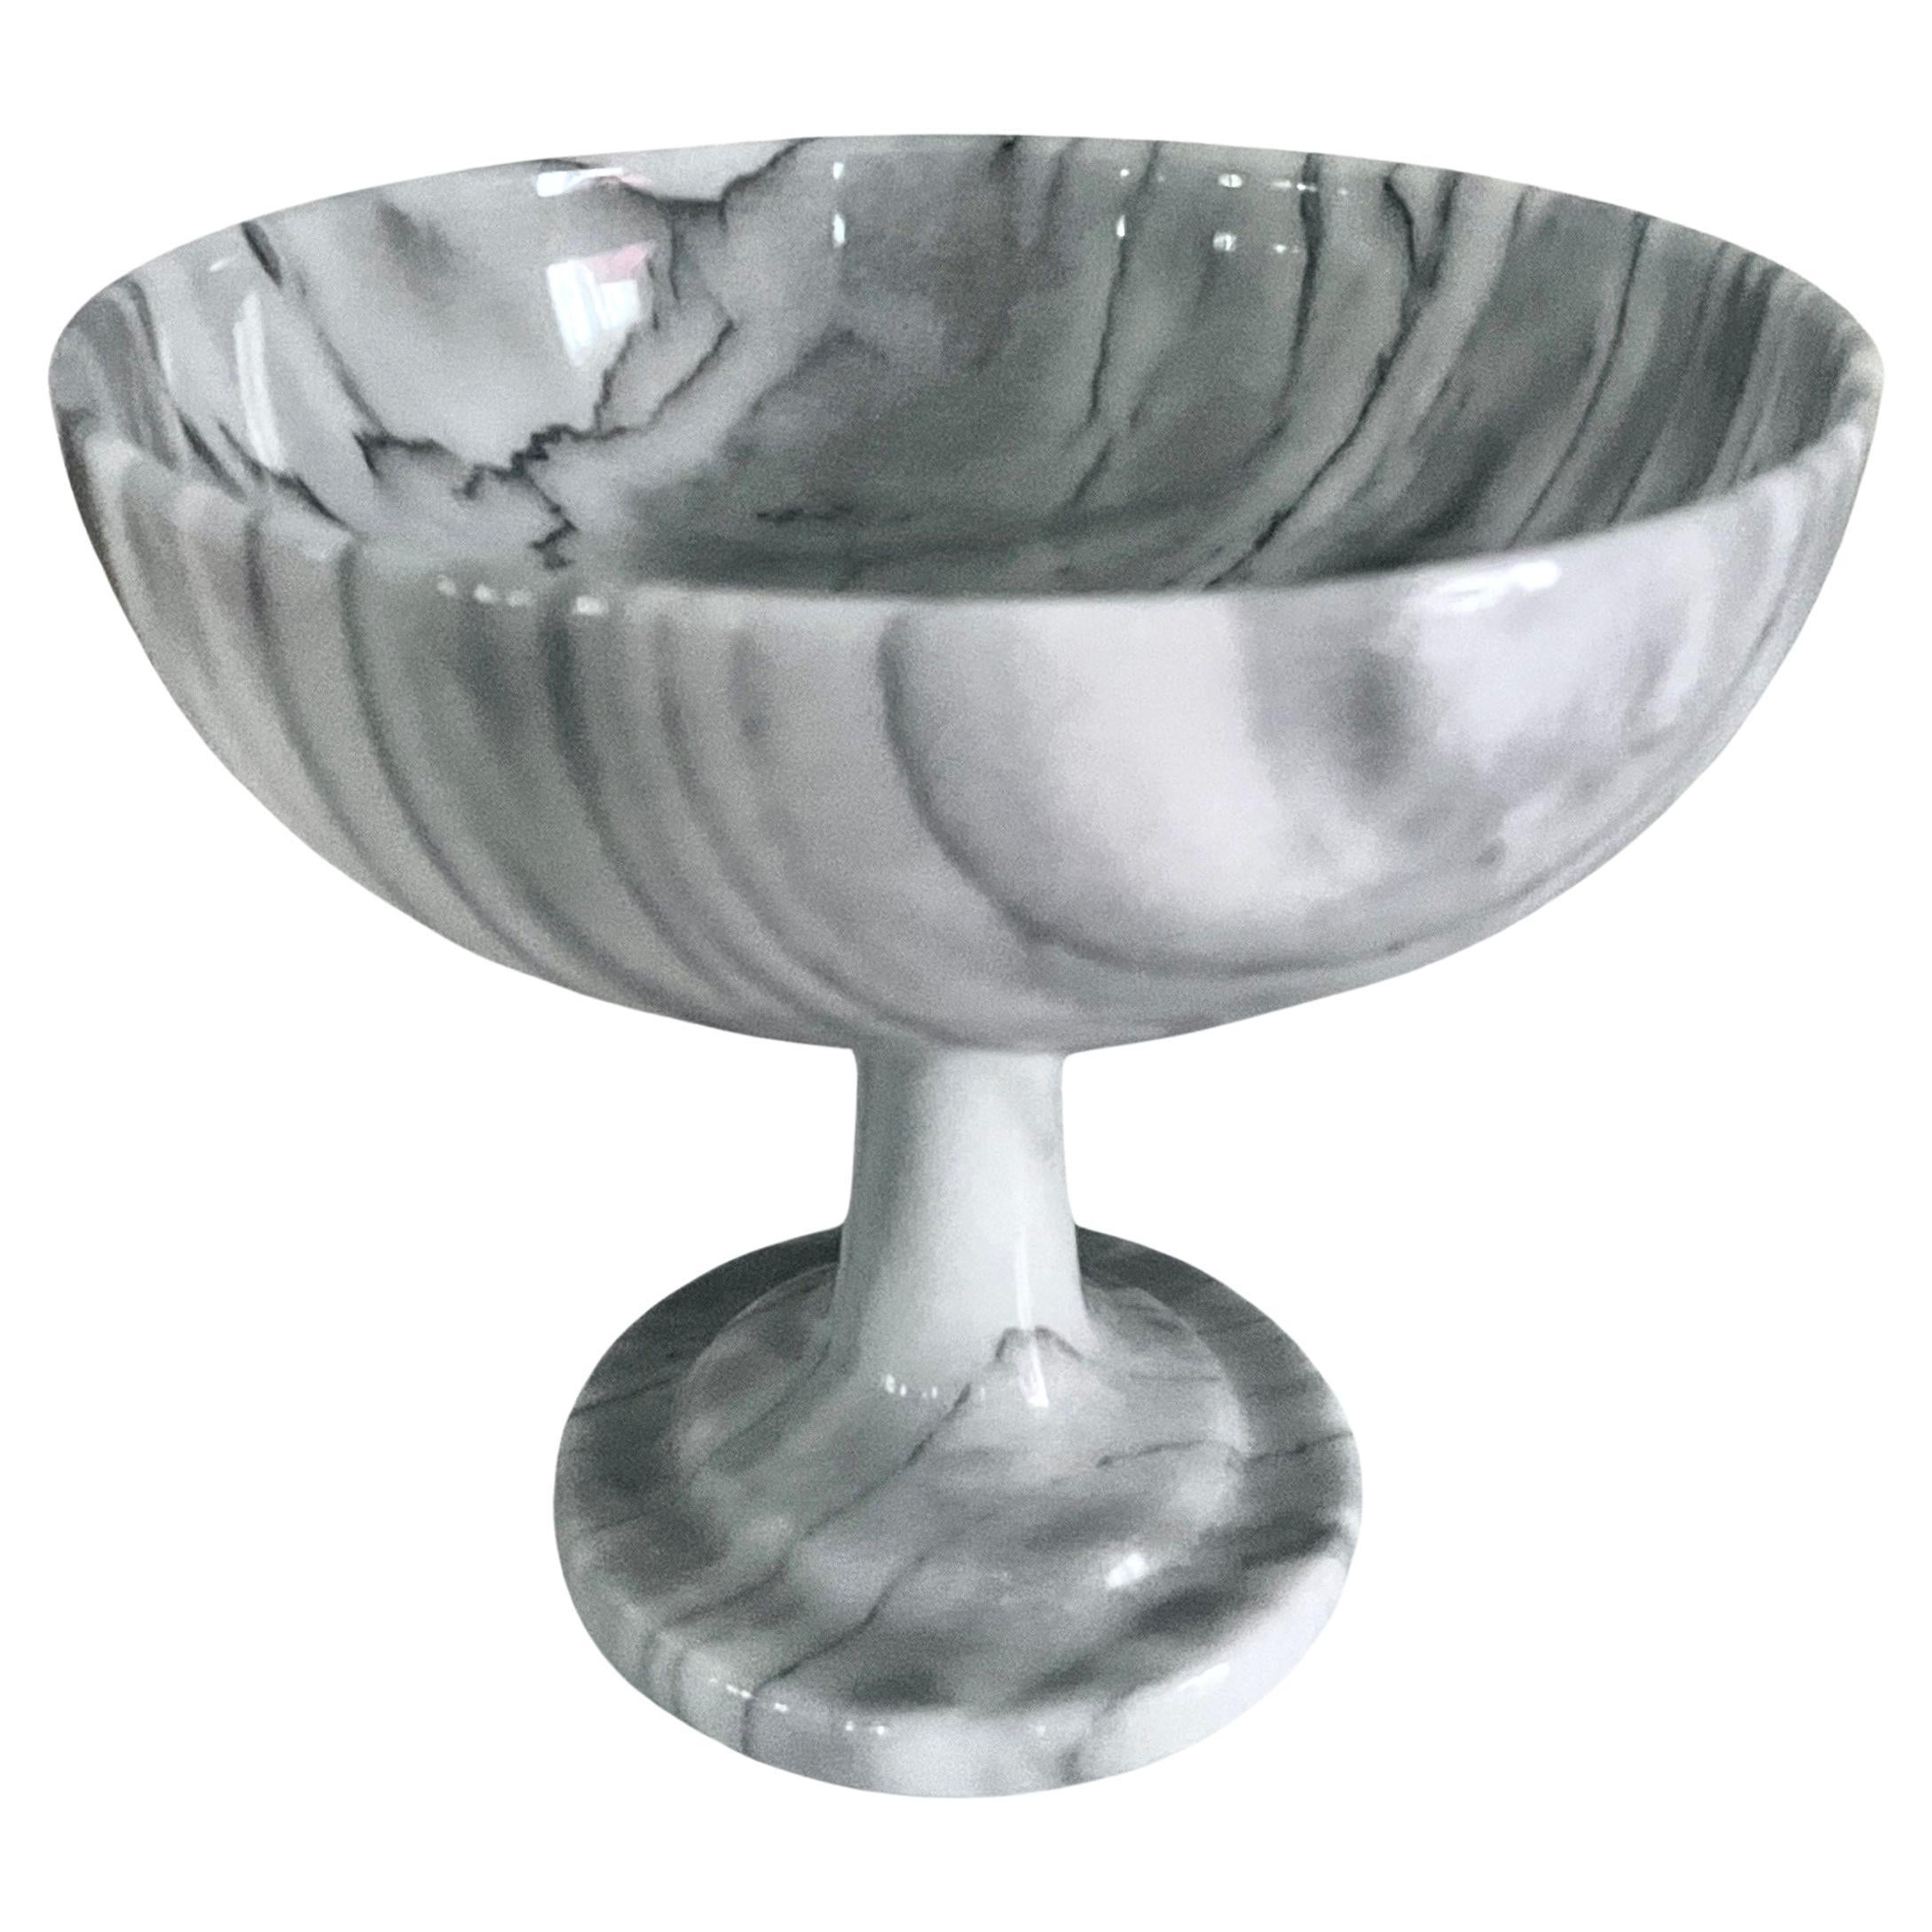 Carrara Marble Footed Open Bowl or Centerpiece For Sale